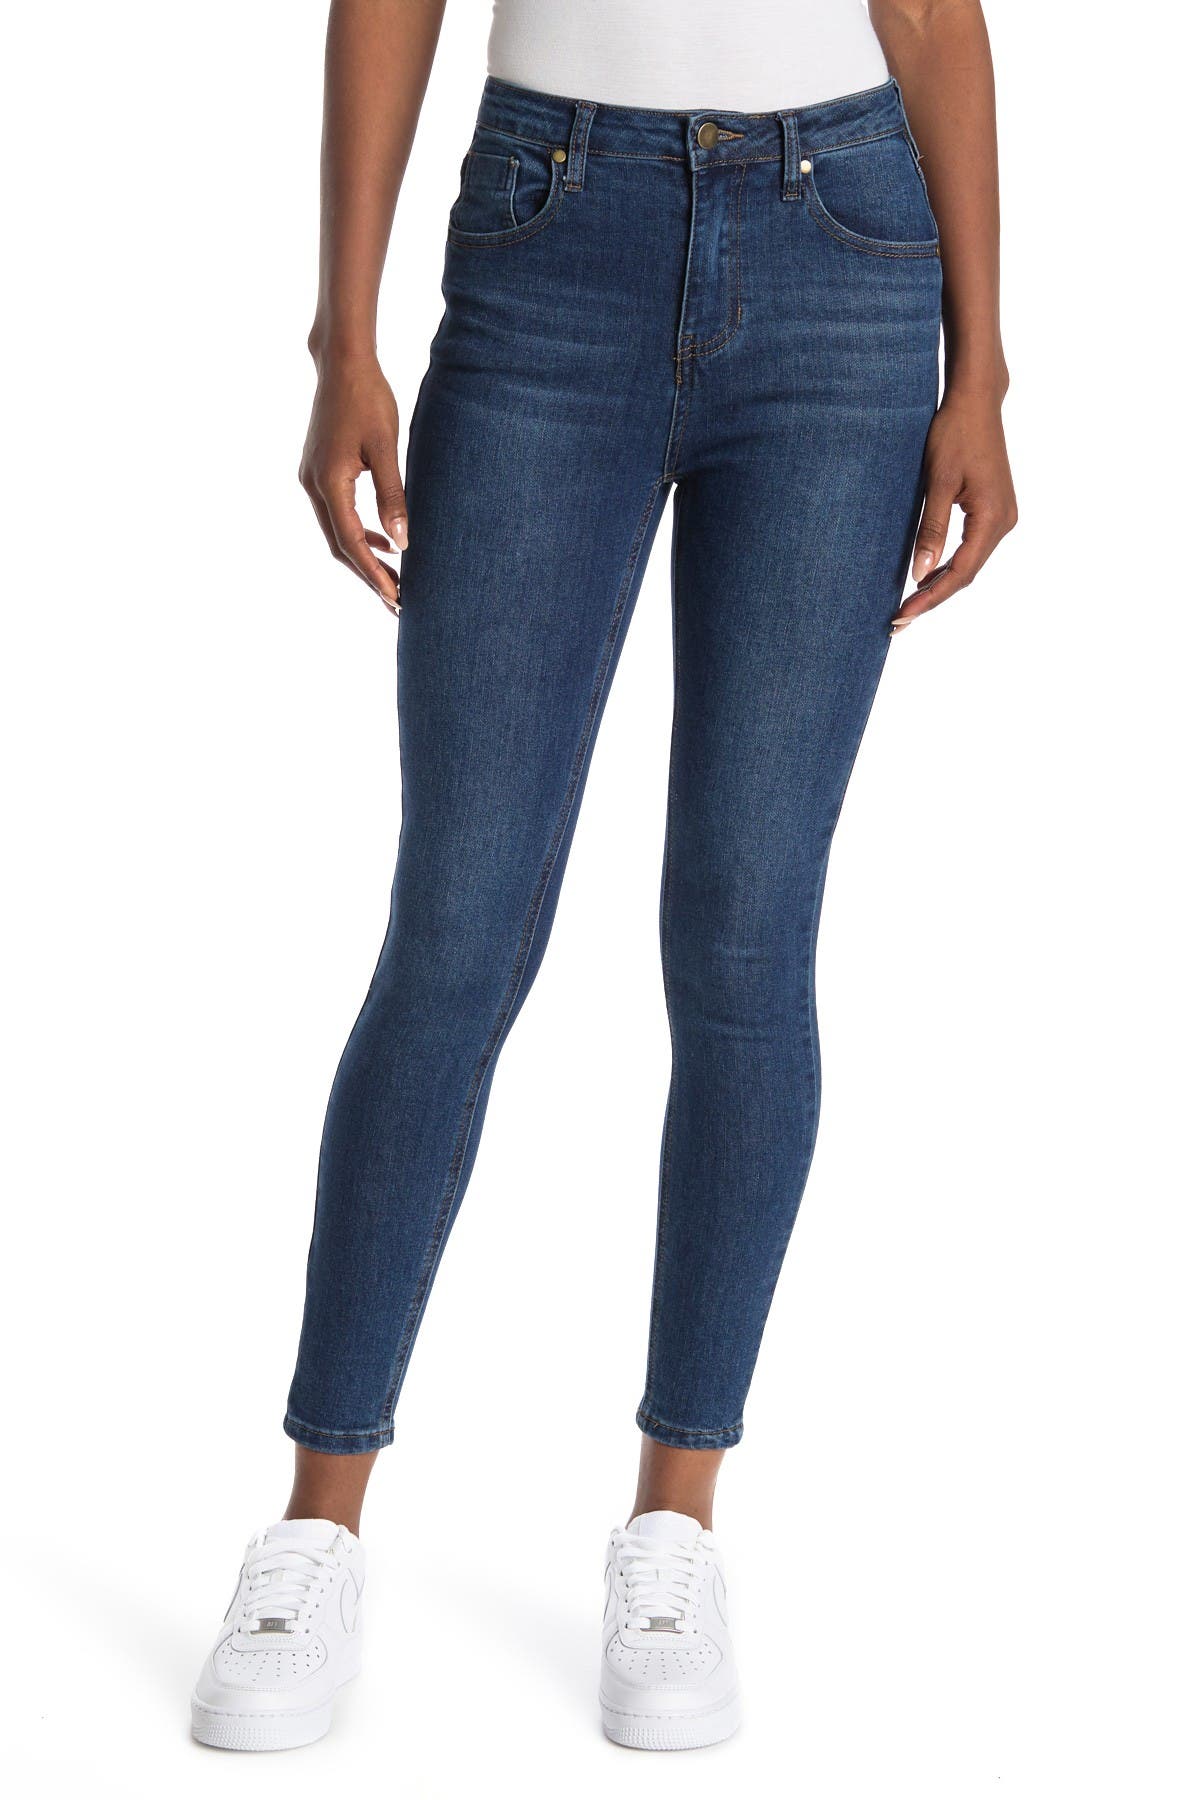 Abound High Rise Skinny Sustainable Denim Jeans In Medium Blue